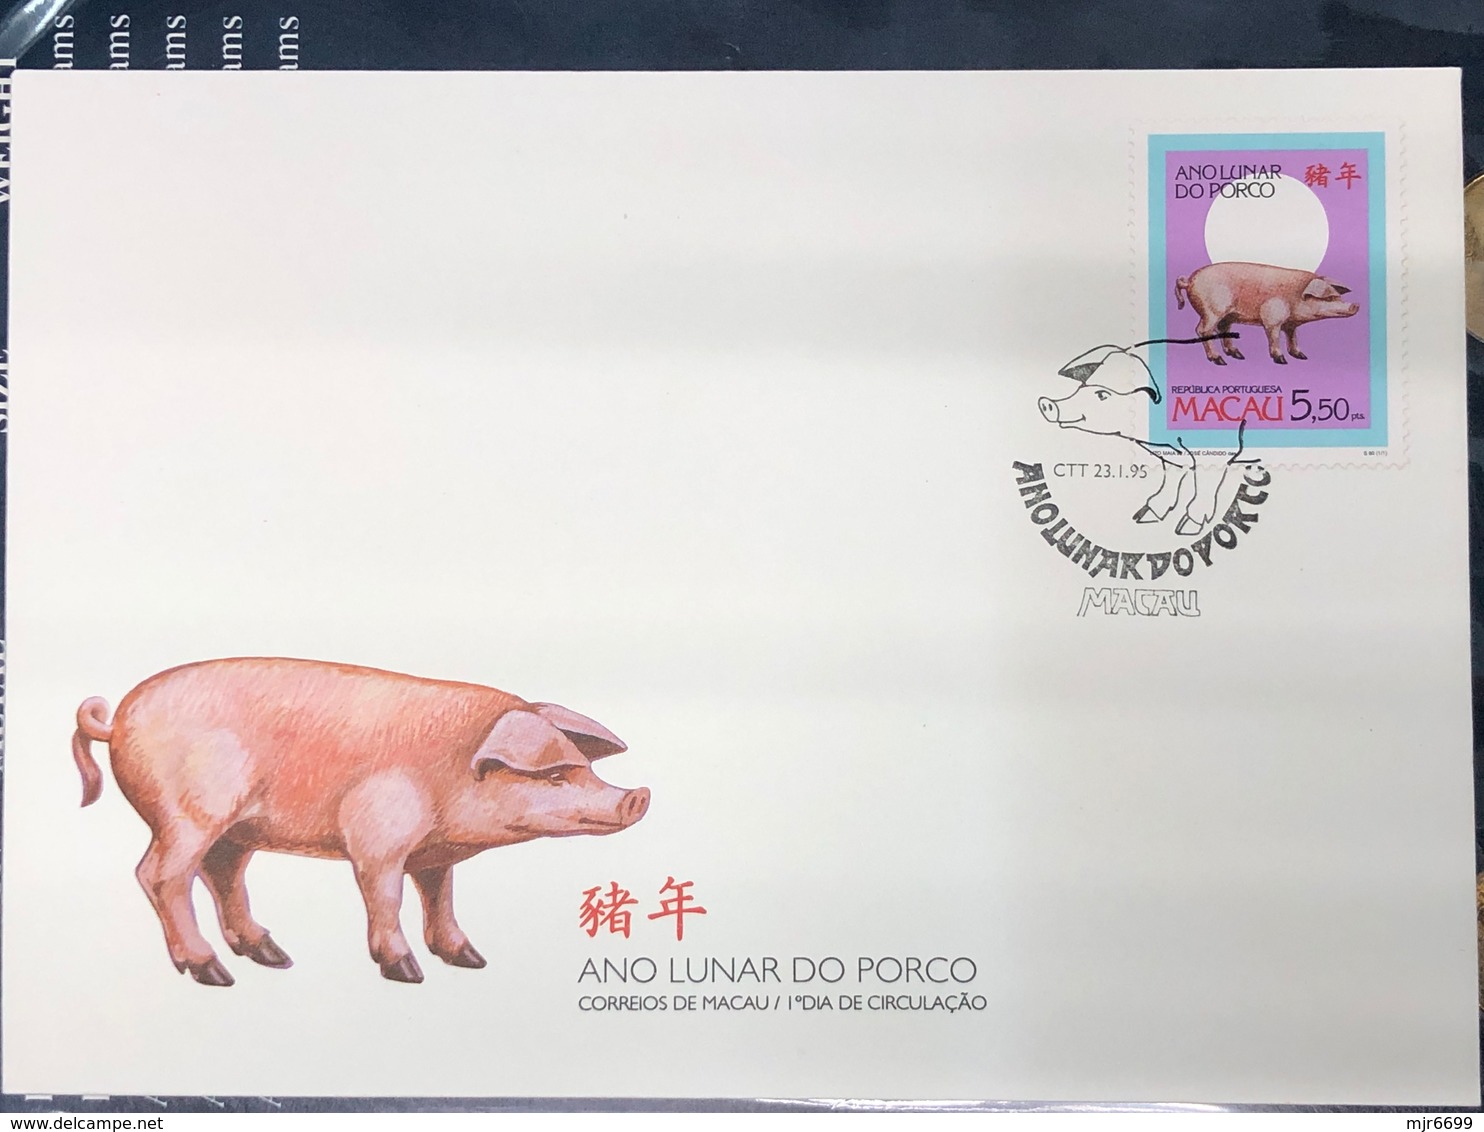 1995 YEAR OF THE PIG POST OFICE FIRST DAY COVER - FDC